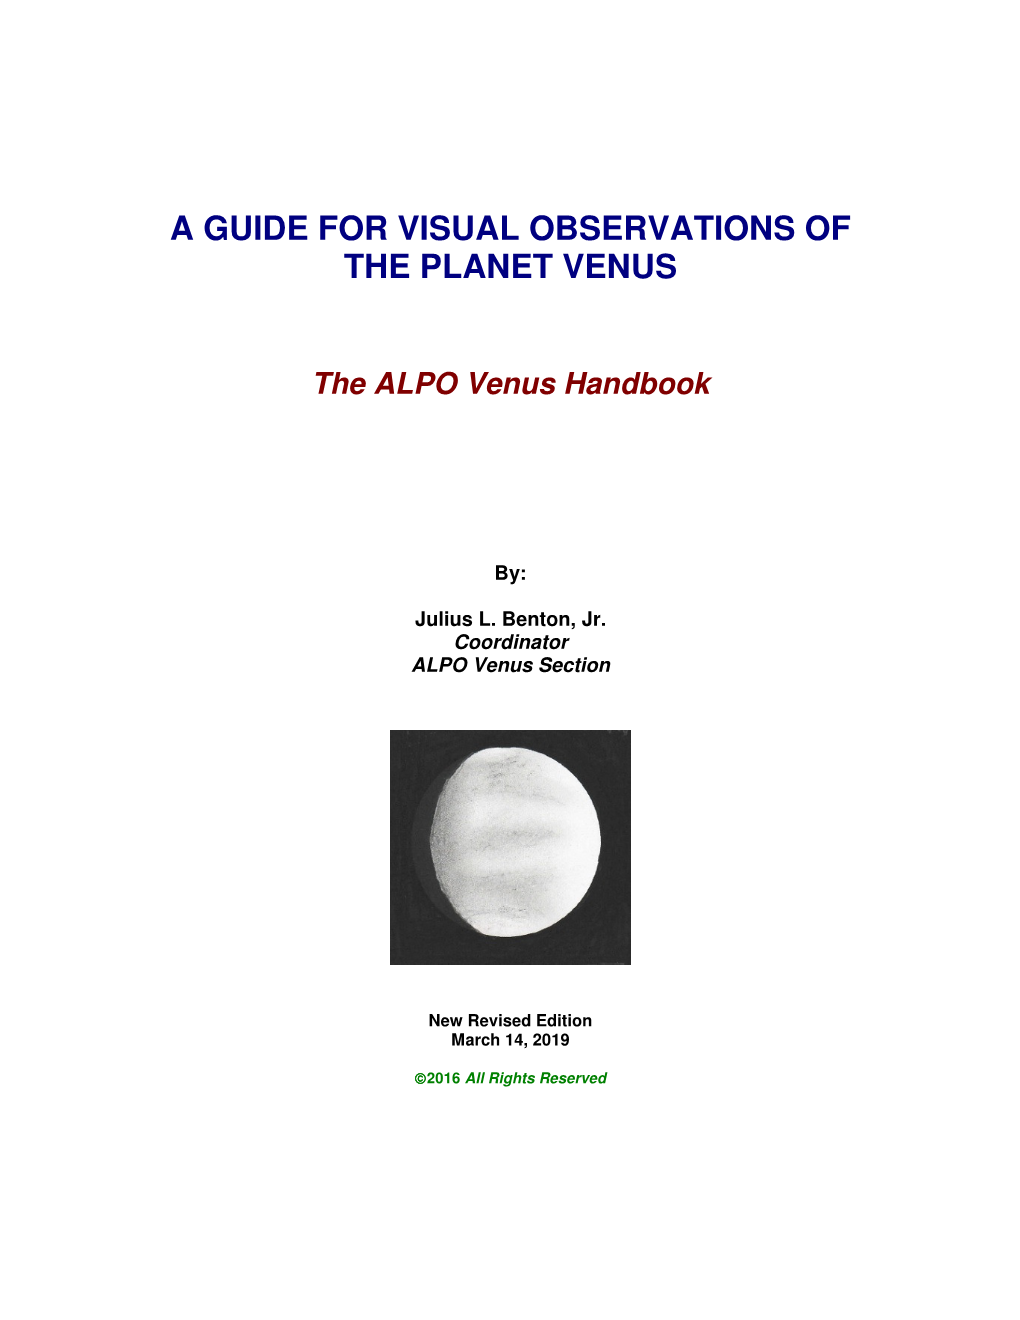 A Guide for Visual Observations of the Planet Venus